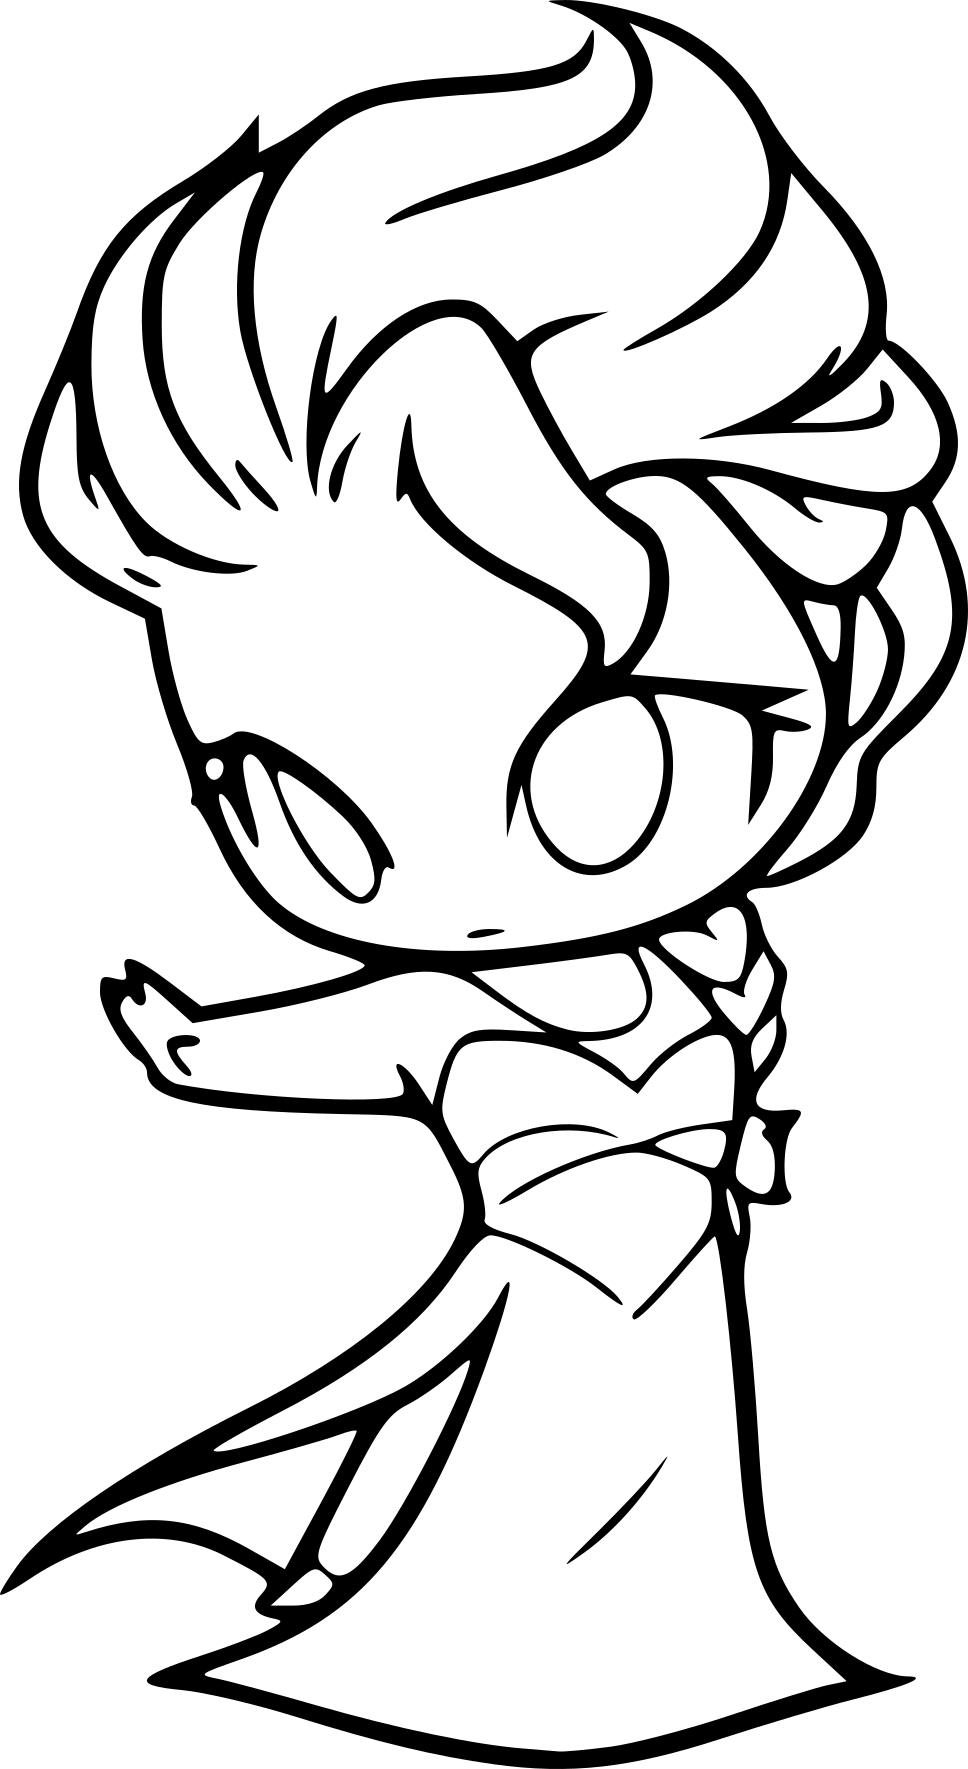 Chibi Elsa From The Frozen coloring page